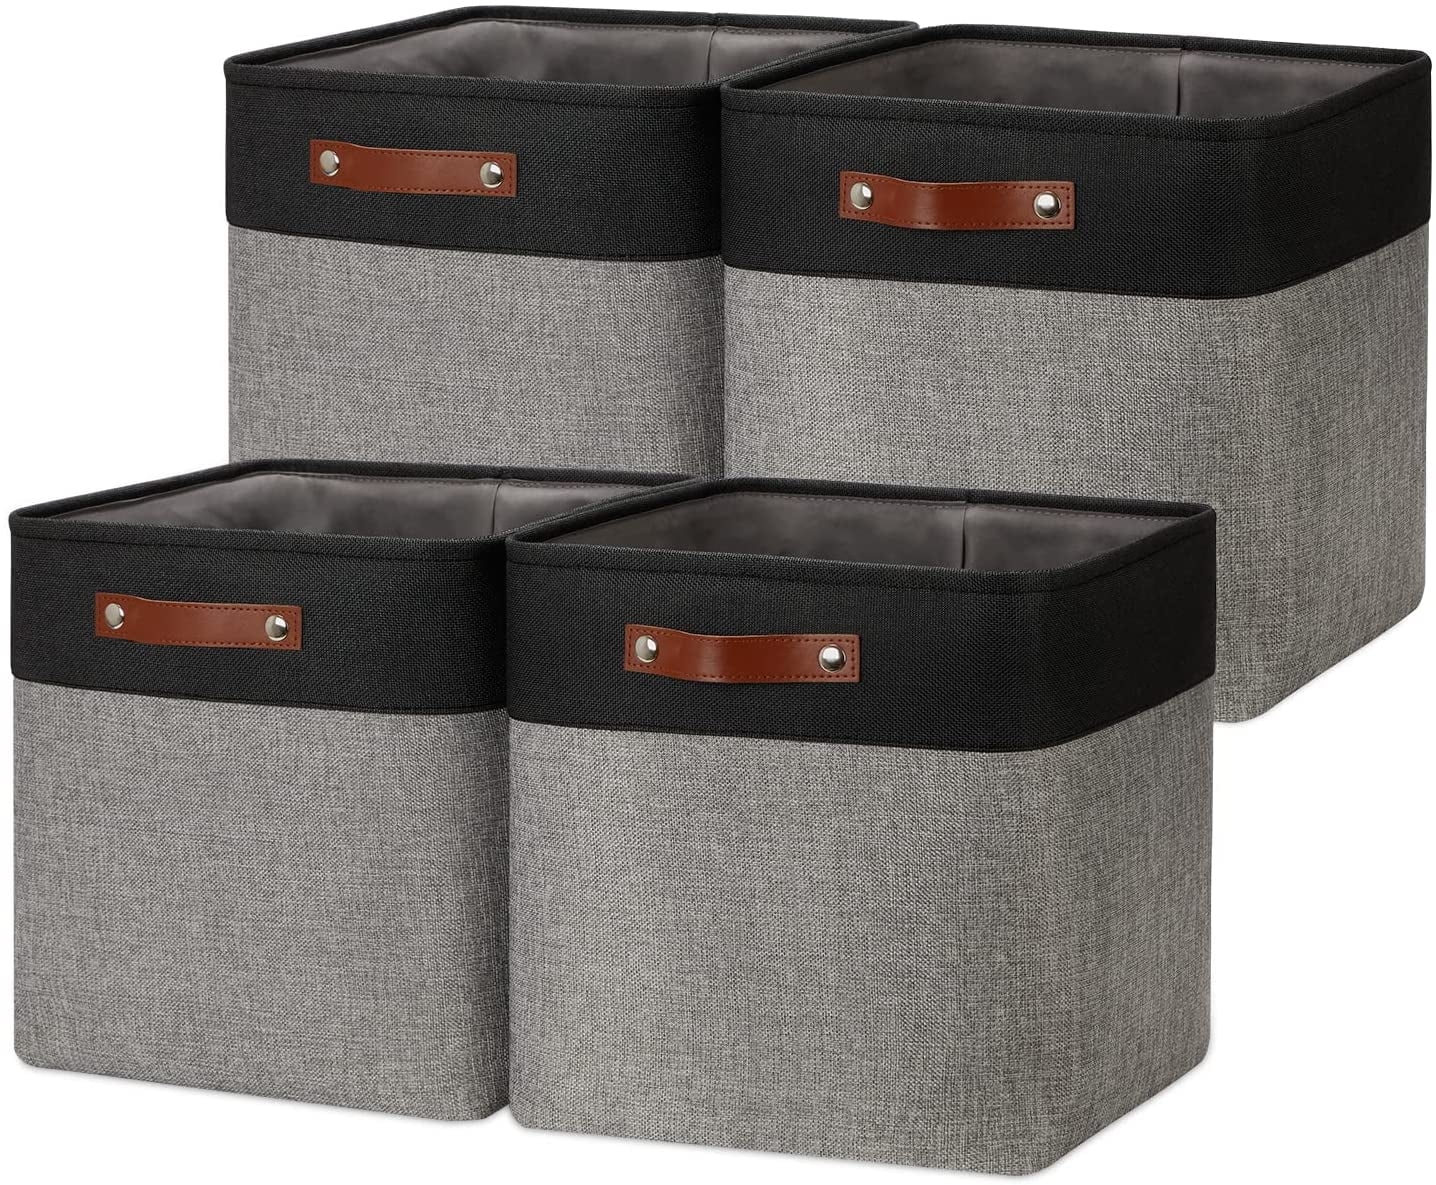 Large Baskets for Closet Storage,13 inch Cube Storage Bins Boxes Fabric ...